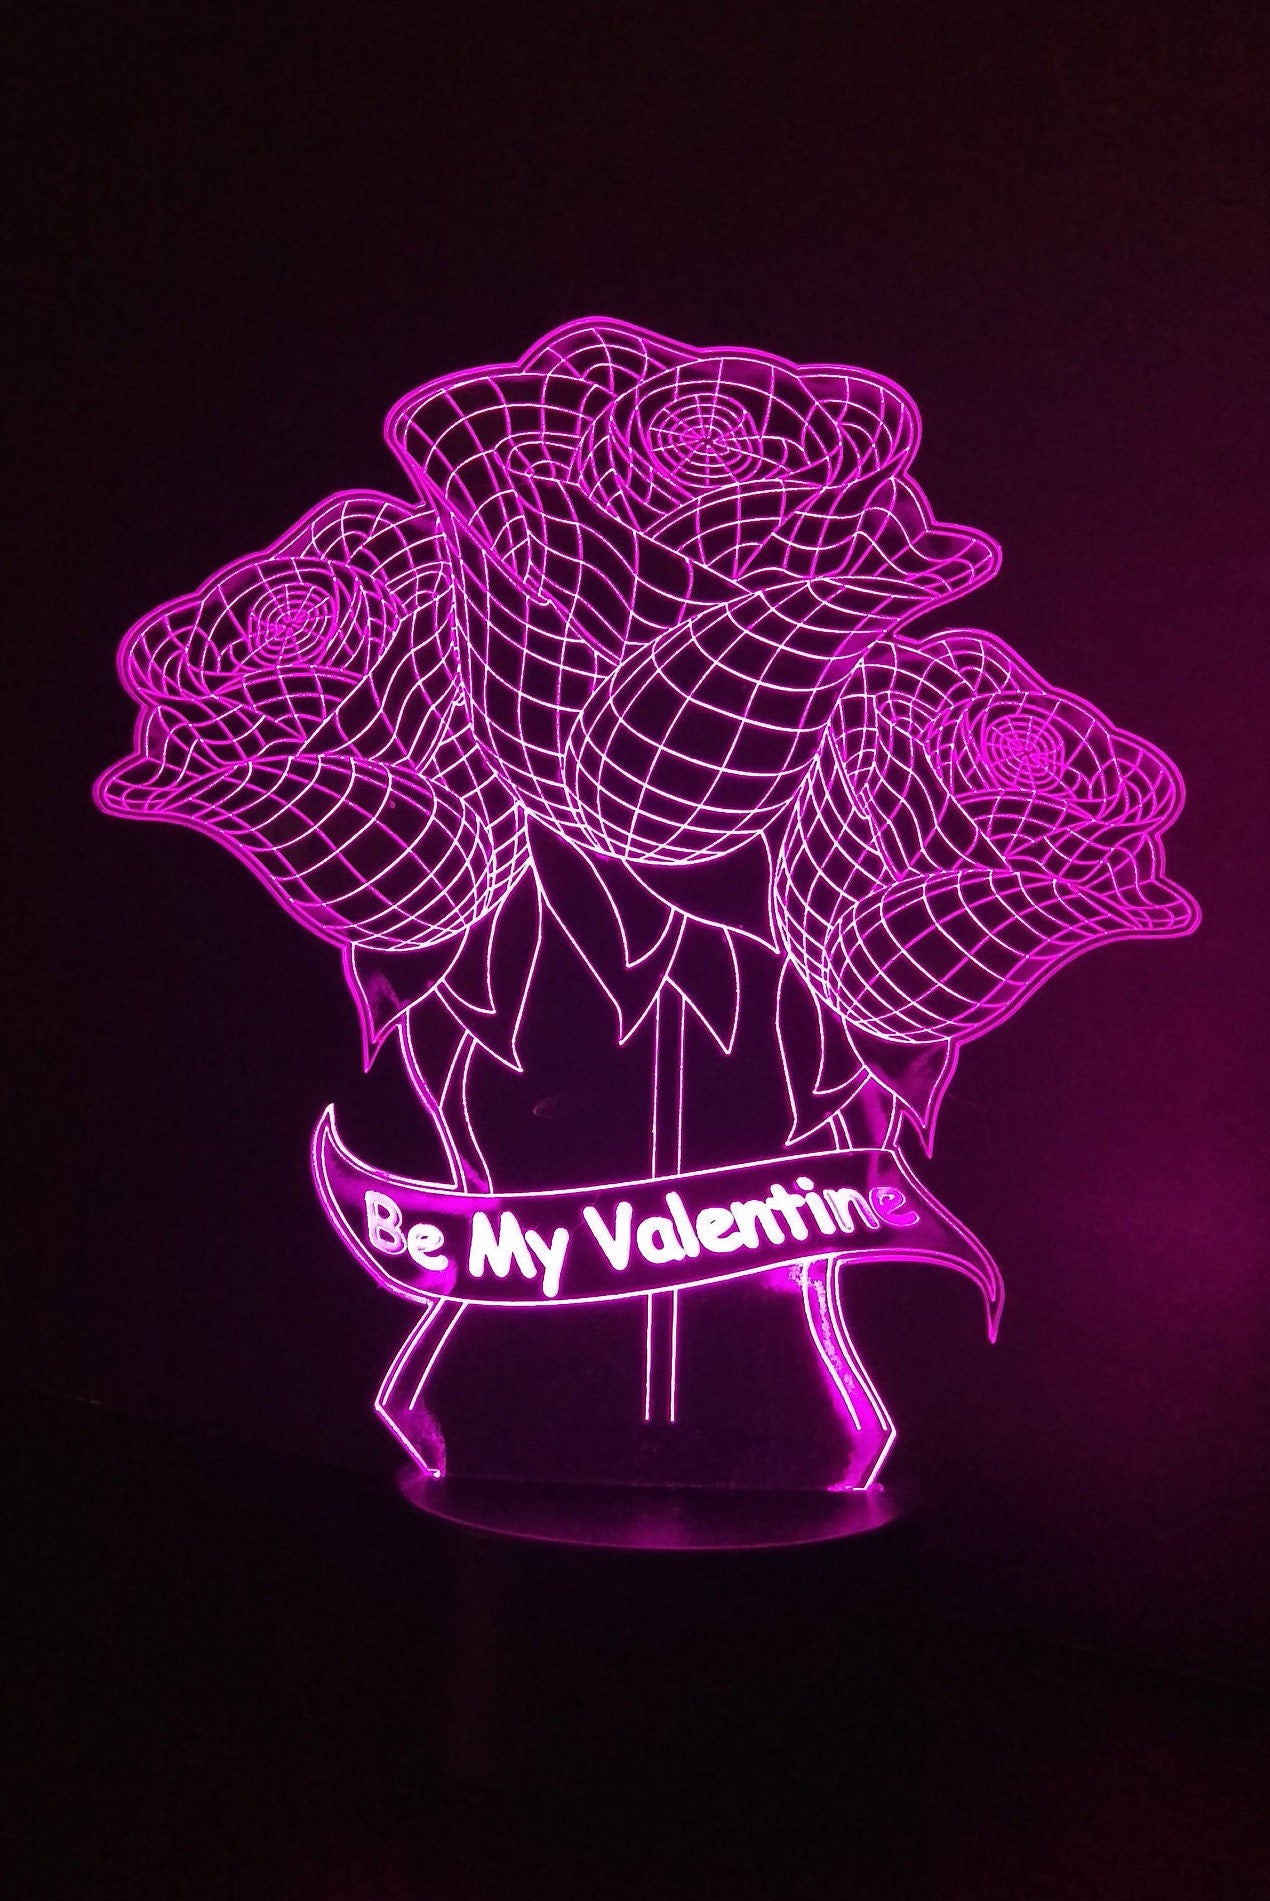 Awesome 3D "Be My Valentine Roses" LED Lamp (1141) - FREE SHIPPING!